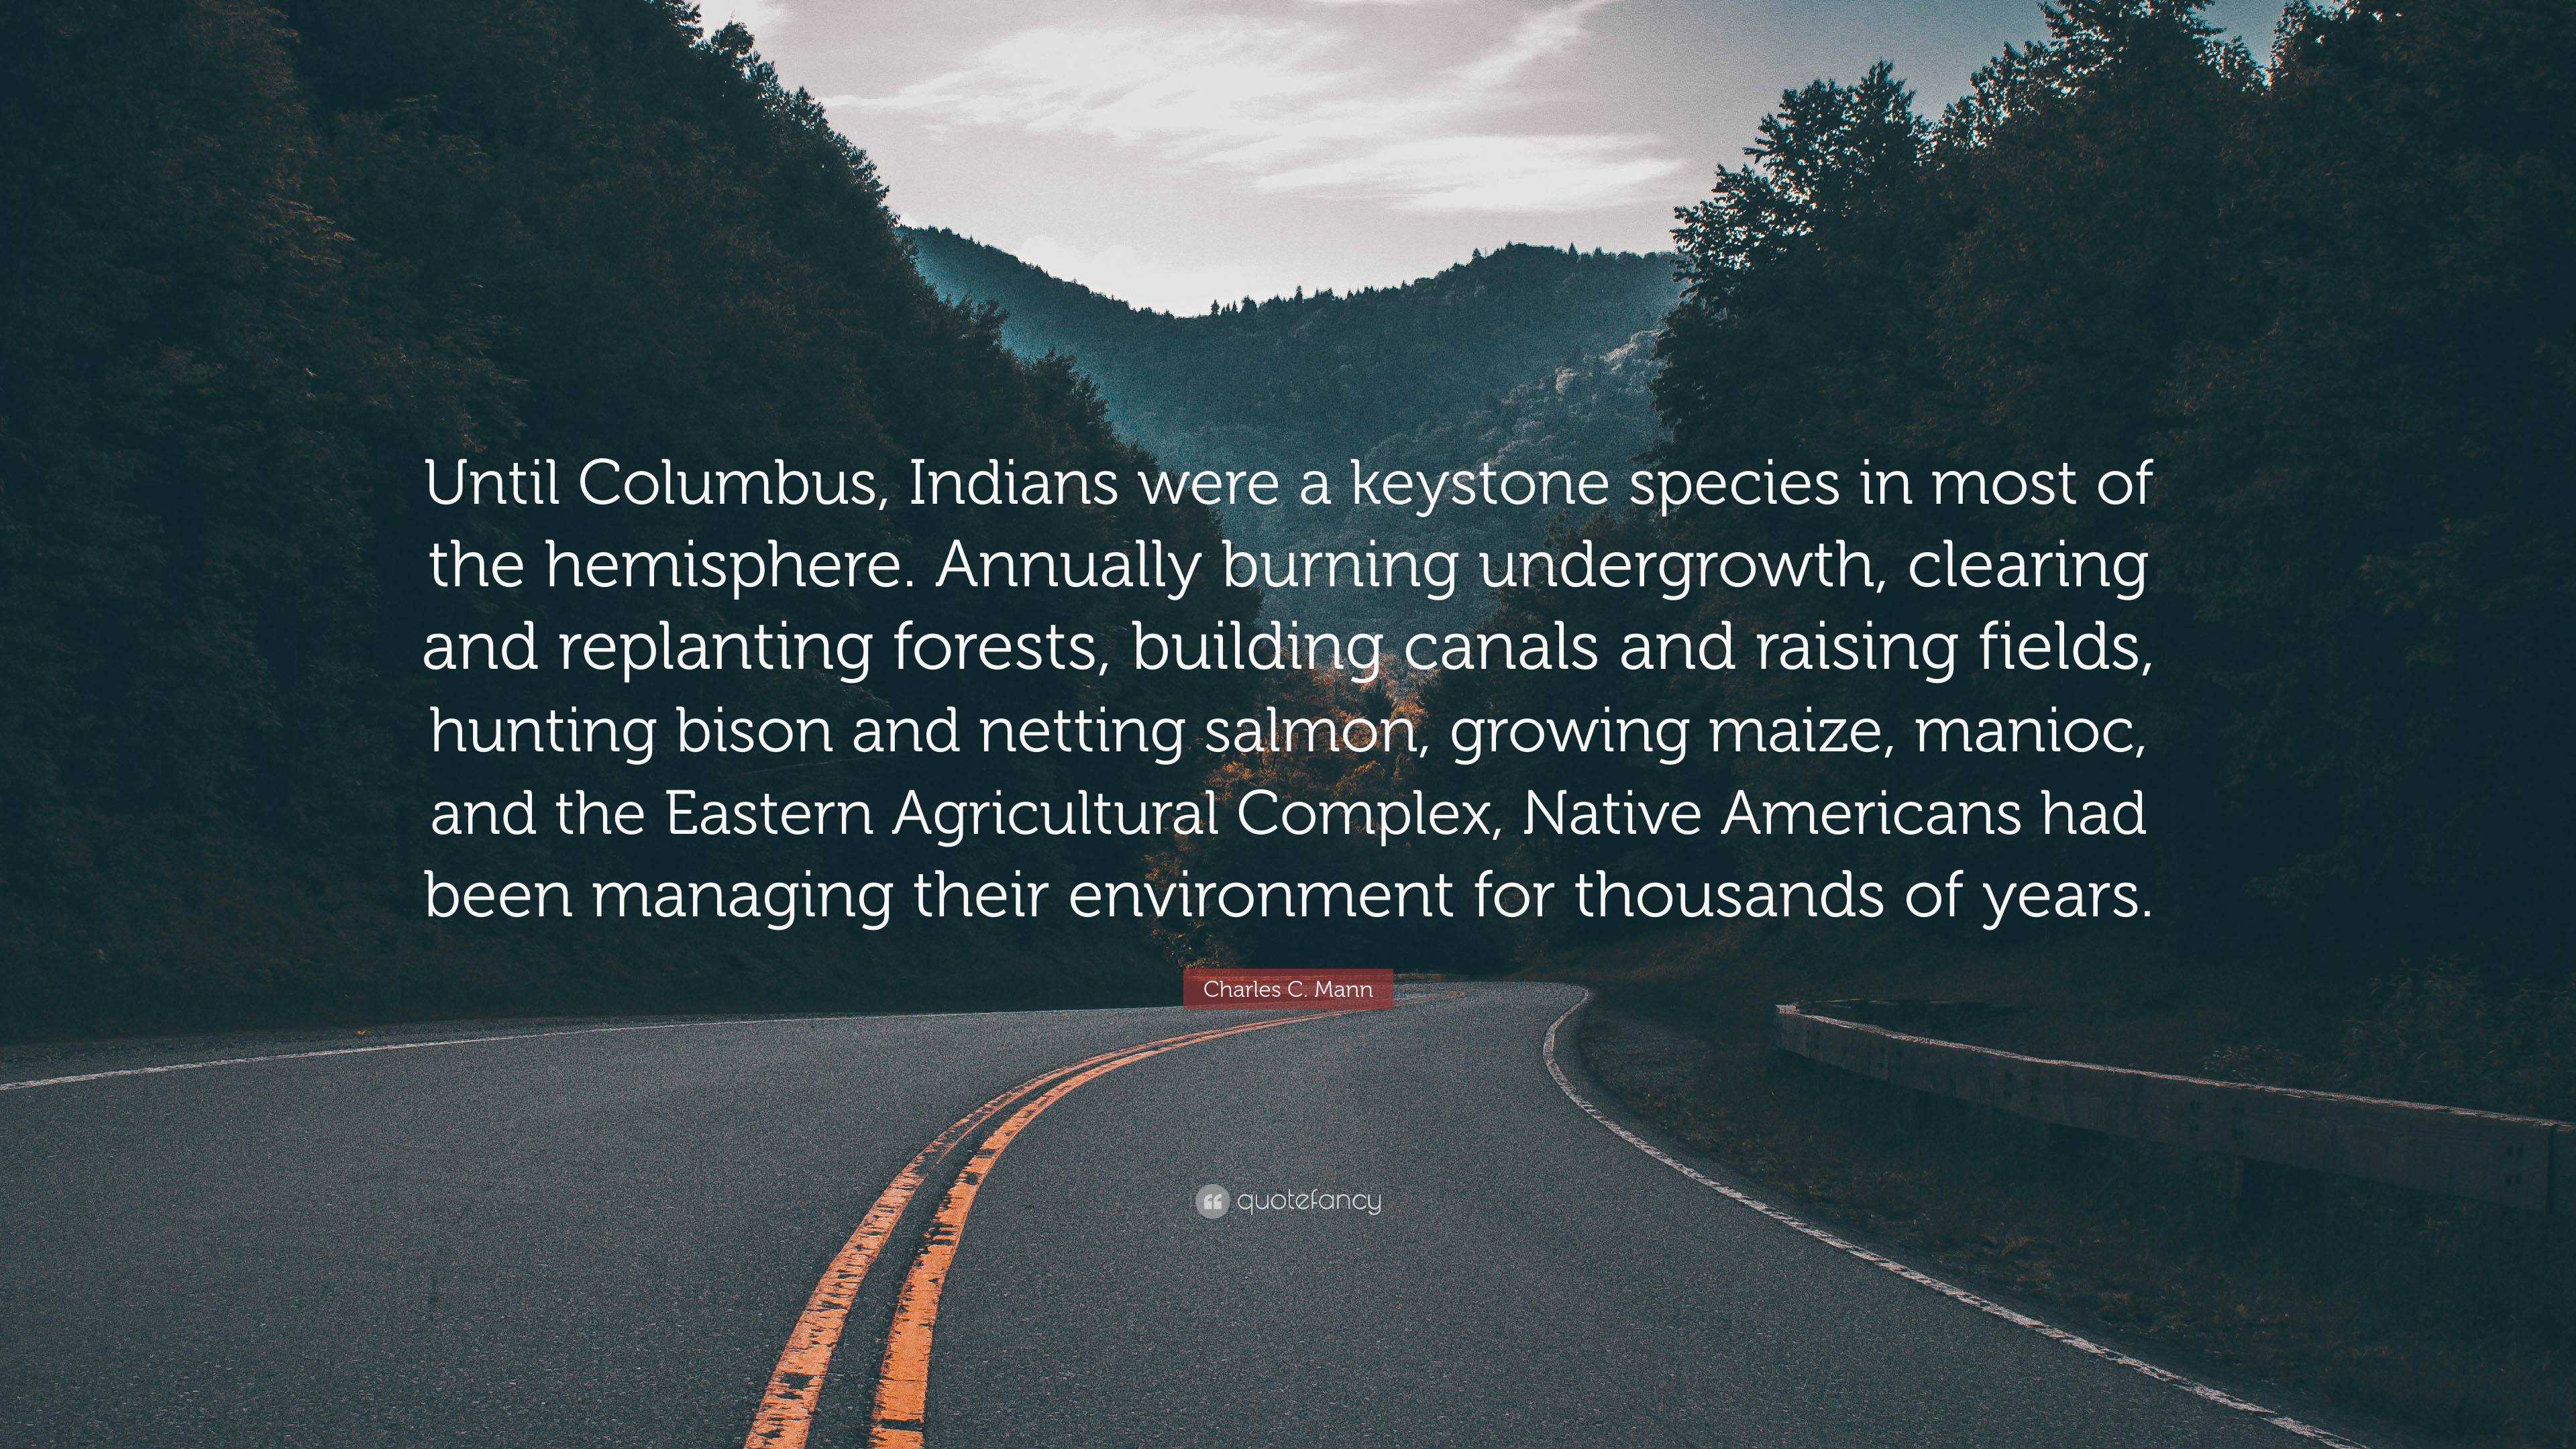 Keystone Species that Live in the Mountains